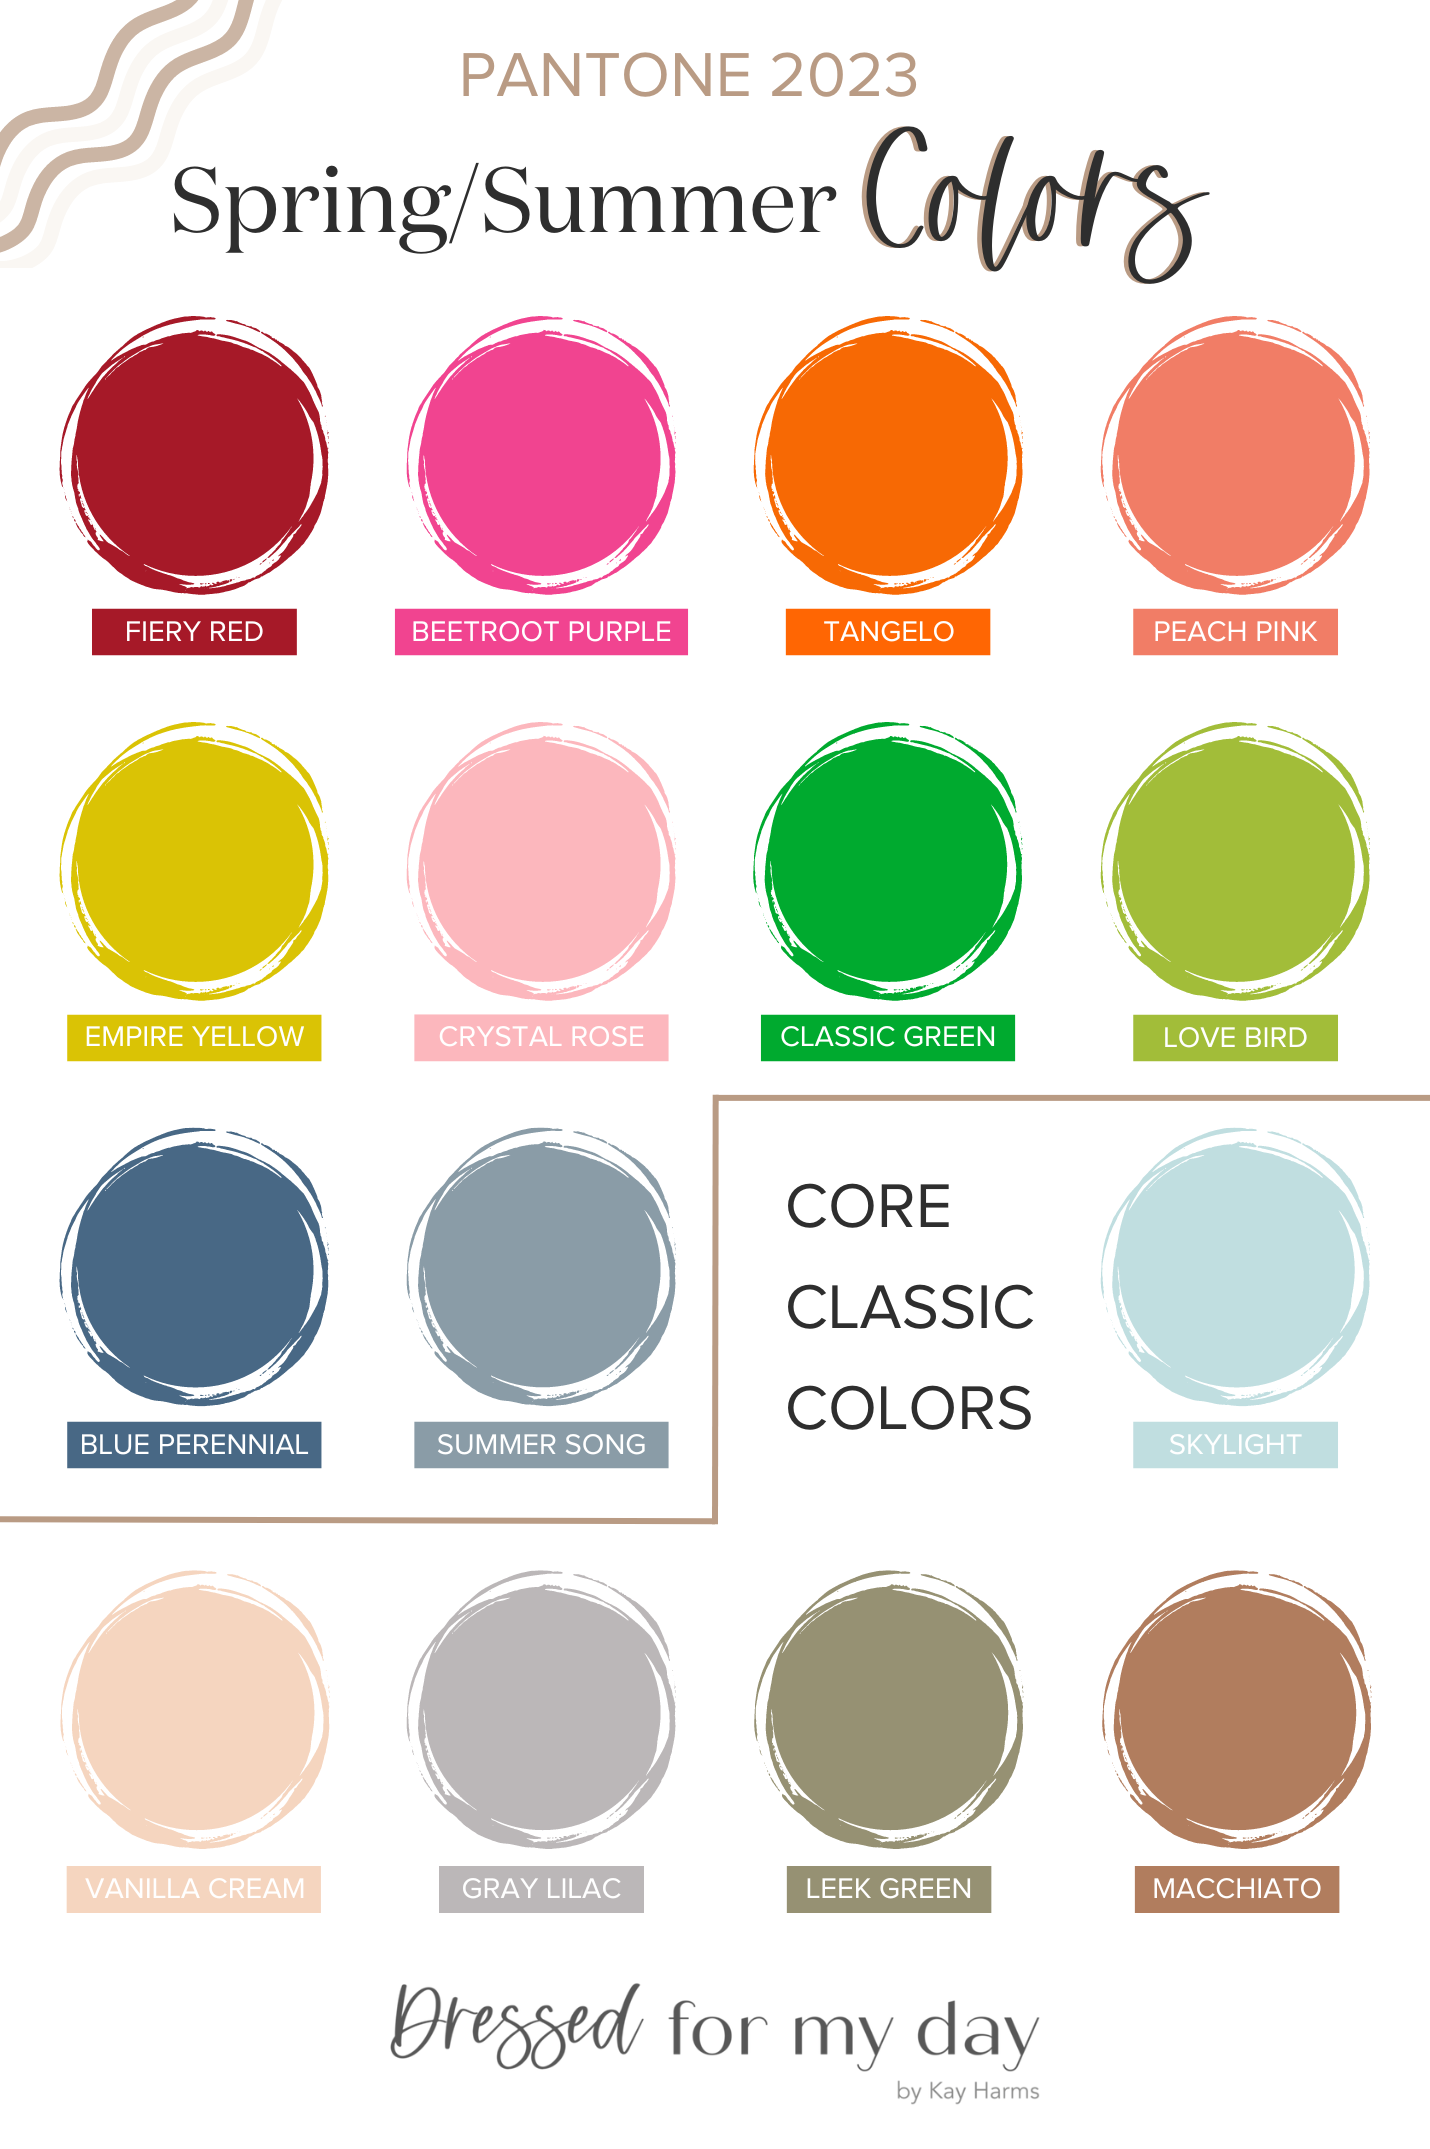 Which Color to Wear on What Day: Colors of the Week - Color Meanings